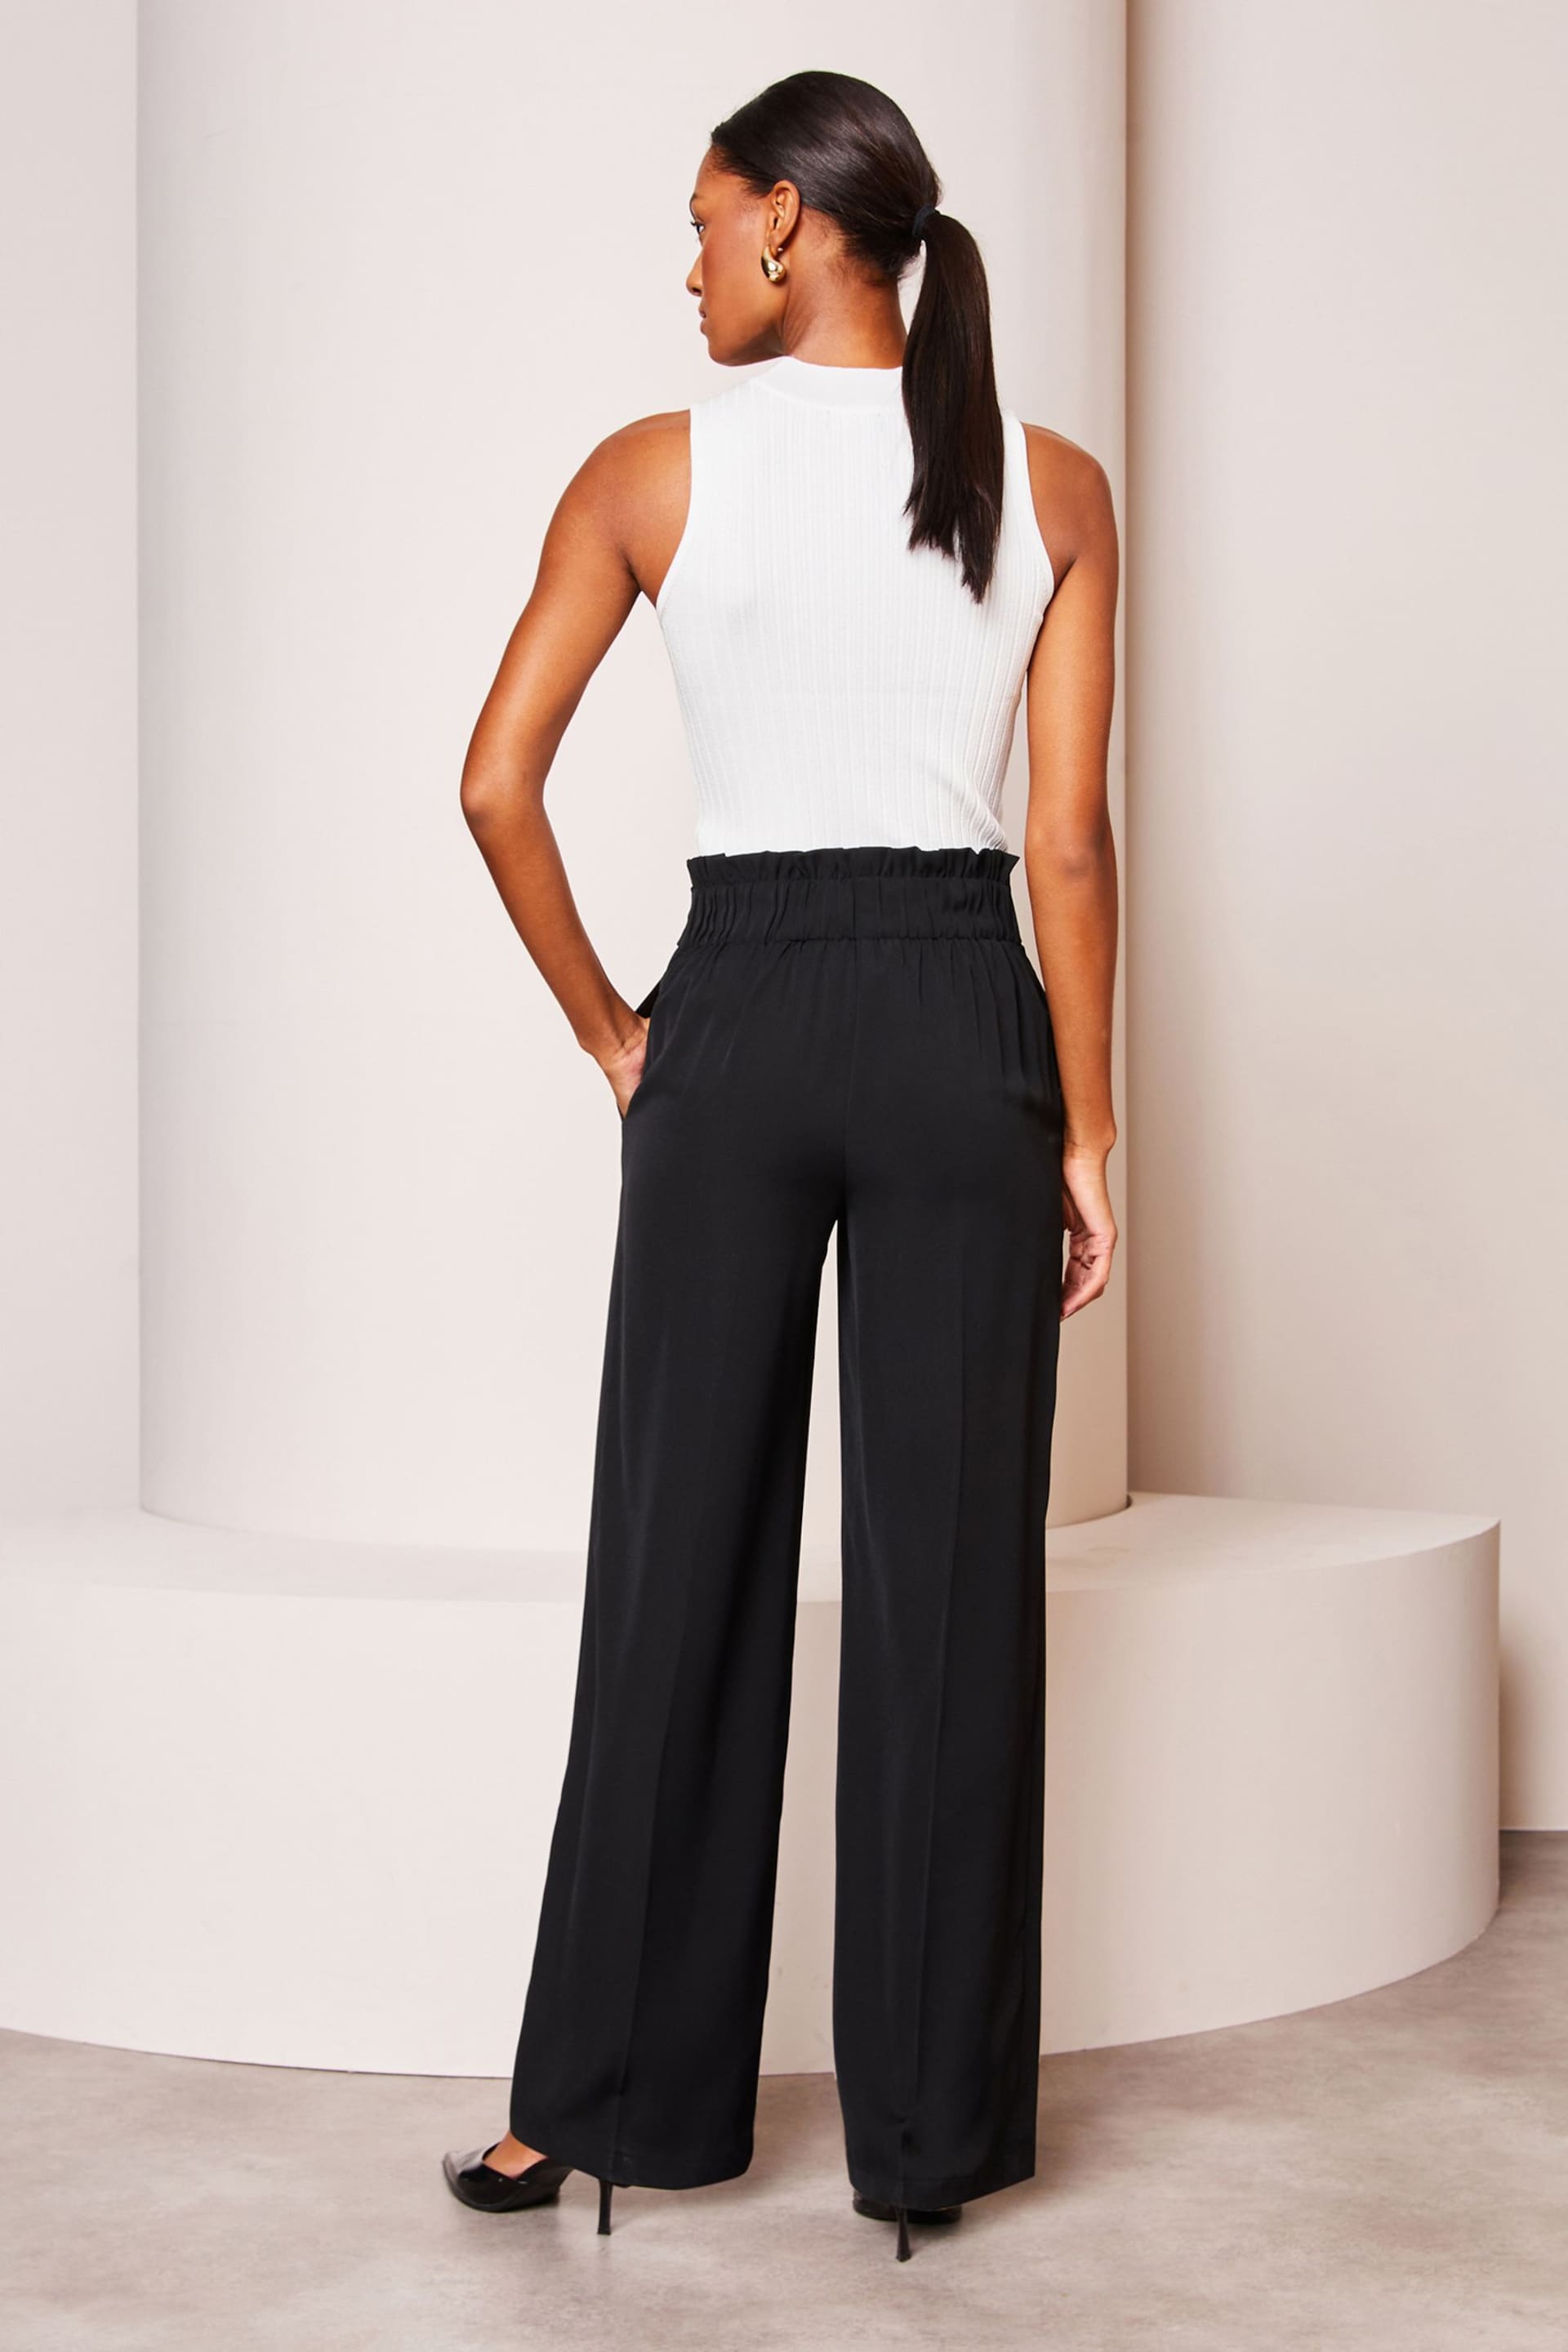 Lipsy Black Belted Wide Leg Trousers - Image 2 of 4